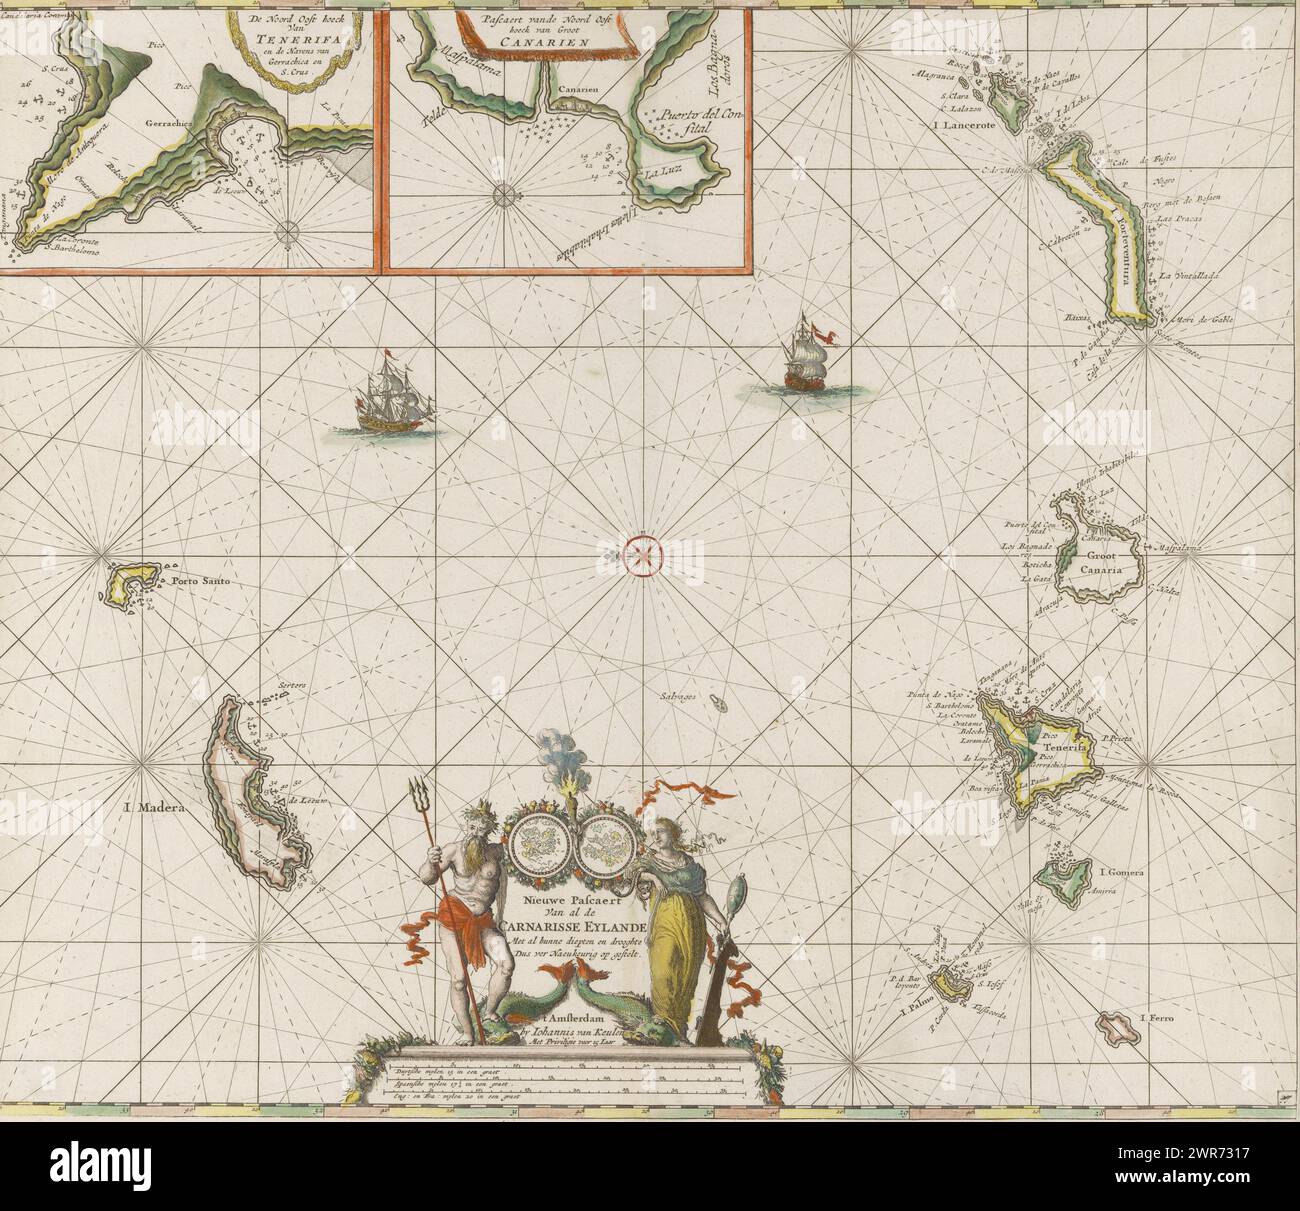 Pass map of the Canary Islands, New Pascaert van al de Carnarisse Eylande (title on object), Nautical chart of the Canary Islands. With a compass rose, North is on the left. Above detailed maps of parts of the coast of Tenerife and Gran Canaria. At the bottom of the title, flanked by Triton and the personification of Caution. Under the title the scale in German, Spanish and English or French miles., print maker: Jan Luyken, publisher: Johannes van Keulen (I), unknown, Amsterdam, c. 1680, paper, etching, brush, height 512 mm × width 597 mm Stock Photo